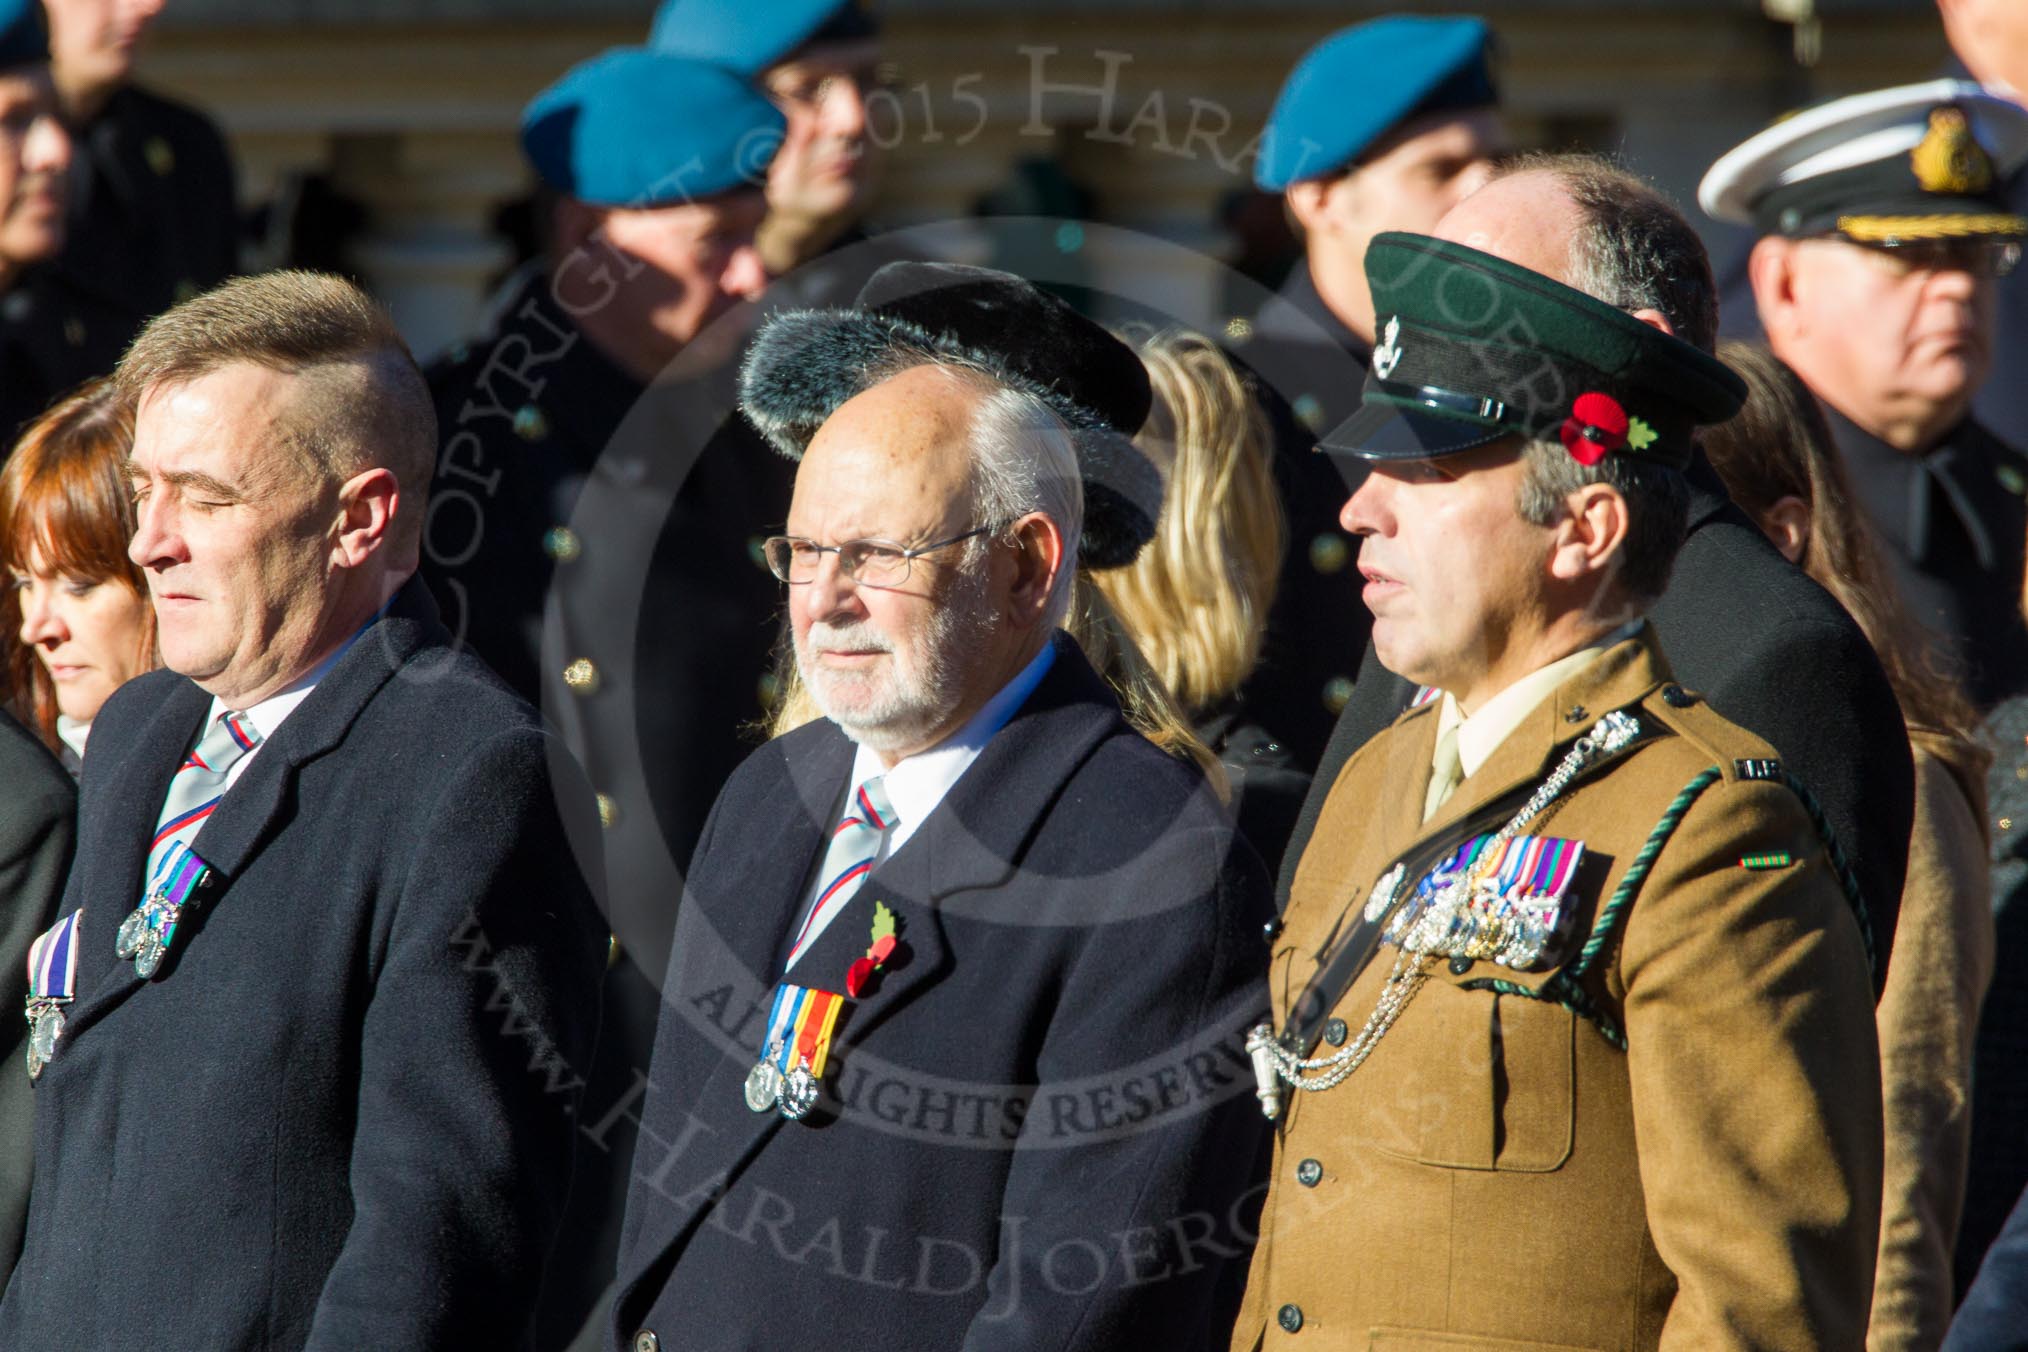 Remembrance Sunday Cenotaph March Past 2013: F7 - Gallantry Medallists League..
Press stand opposite the Foreign Office building, Whitehall, London SW1,
London,
Greater London,
United Kingdom,
on 10 November 2013 at 11:50, image #793